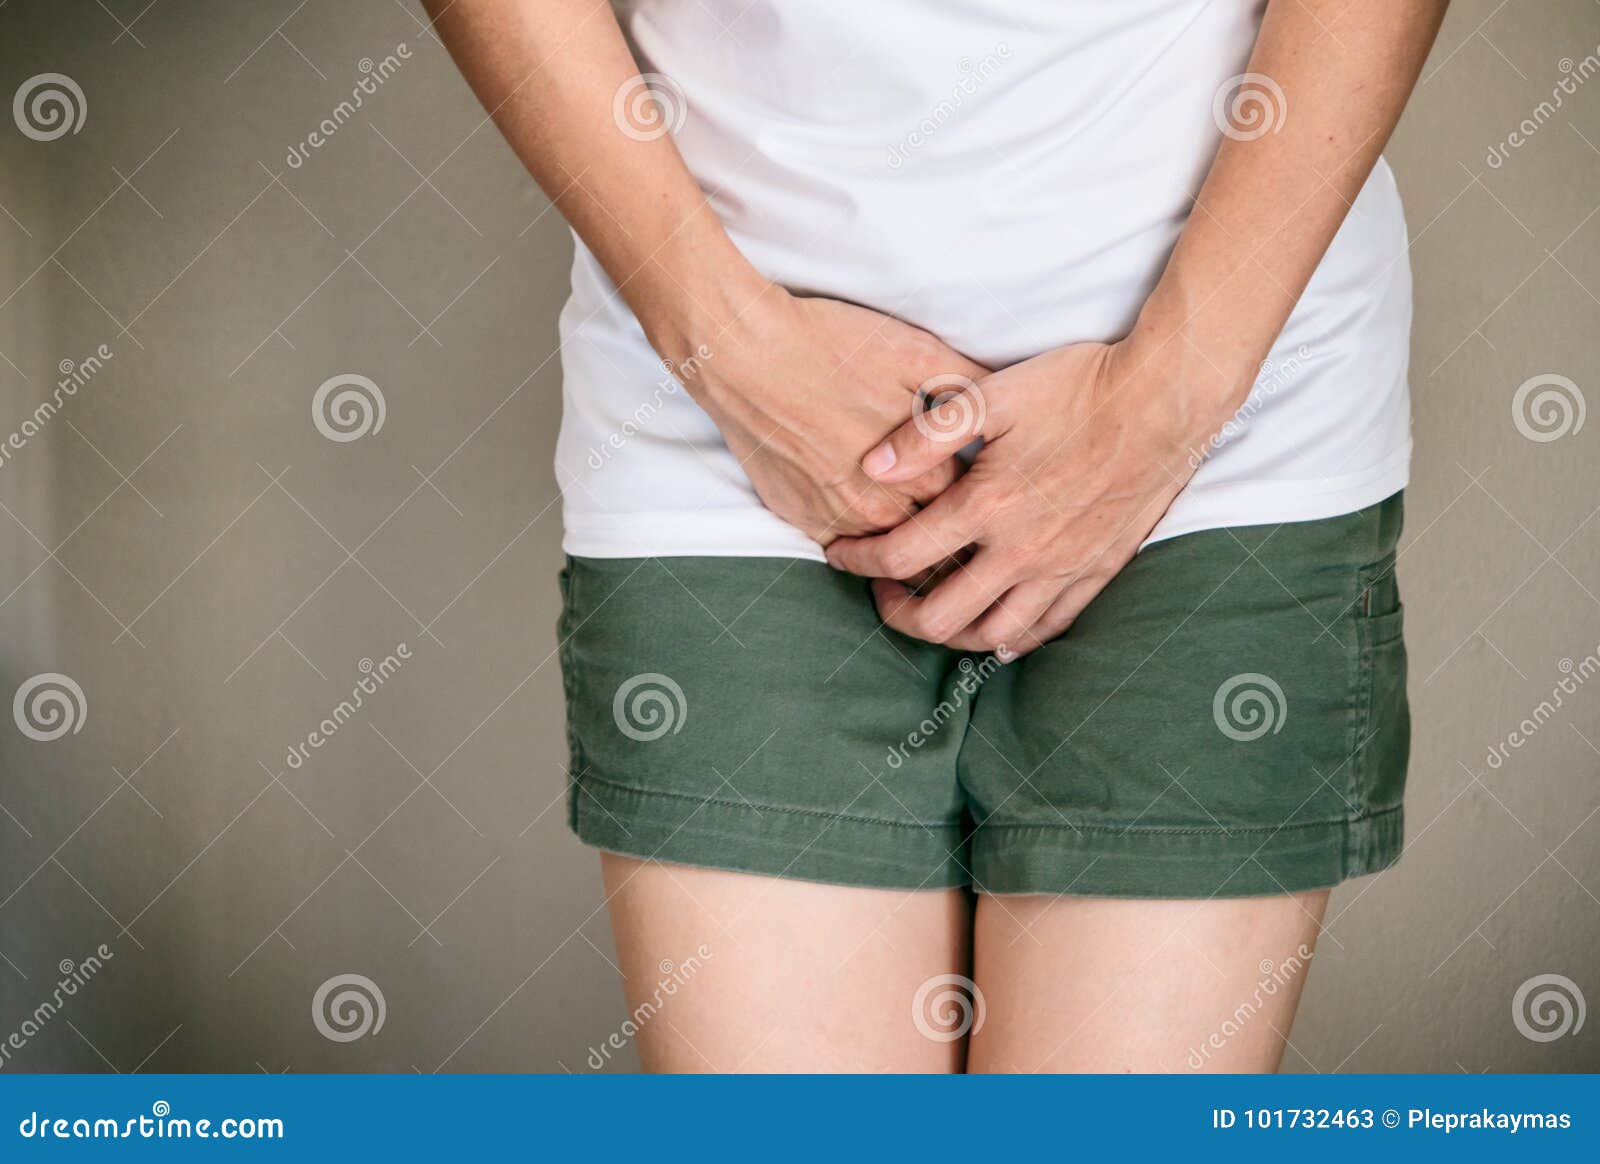 woman with hands holding her crotch she wants to pee ,urinary p